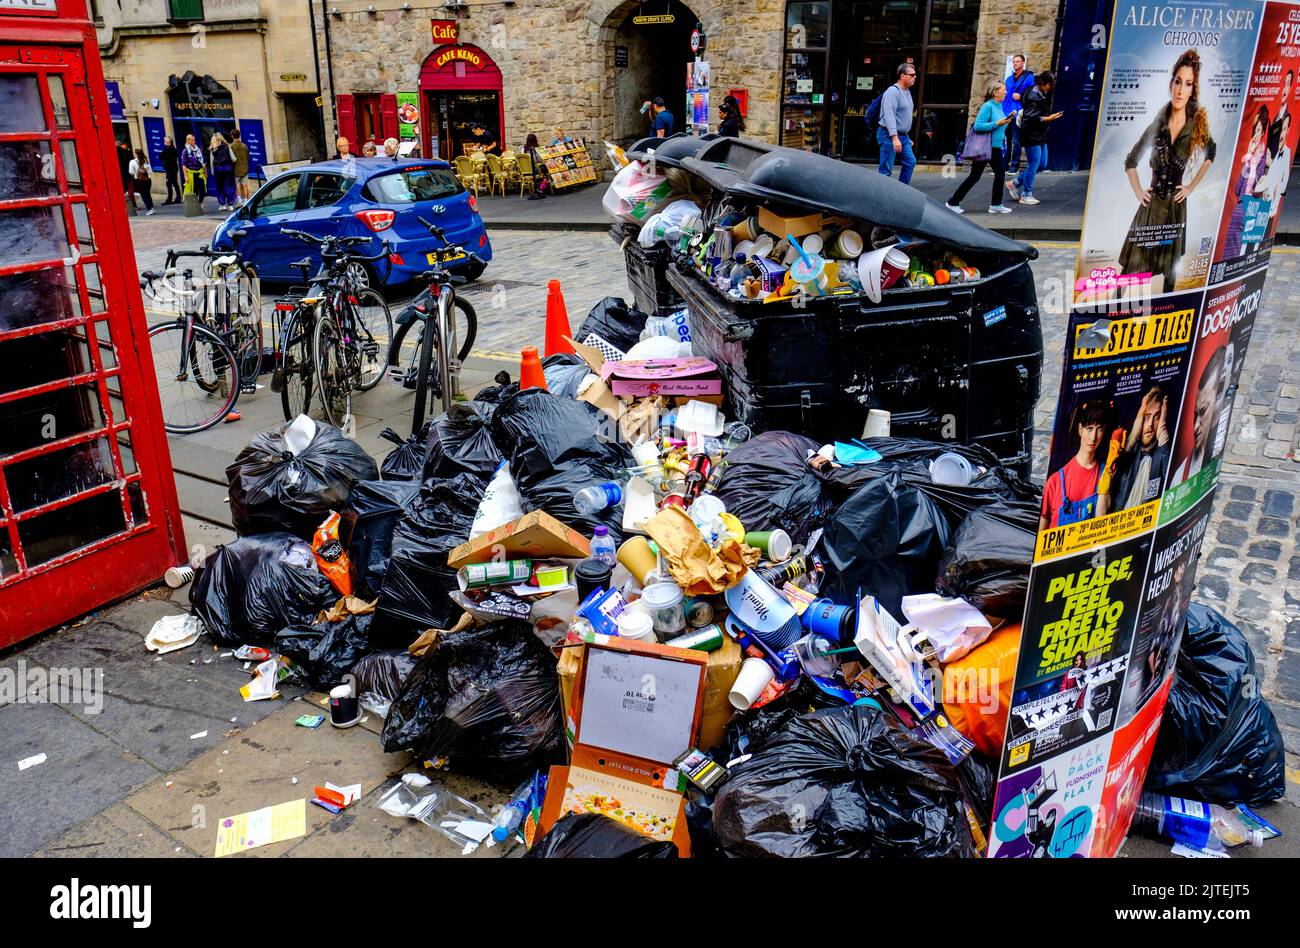 Rubbish Piles Up In The Streets Of Edinburgh Scotland S Capital City Caused By A Strike Of The